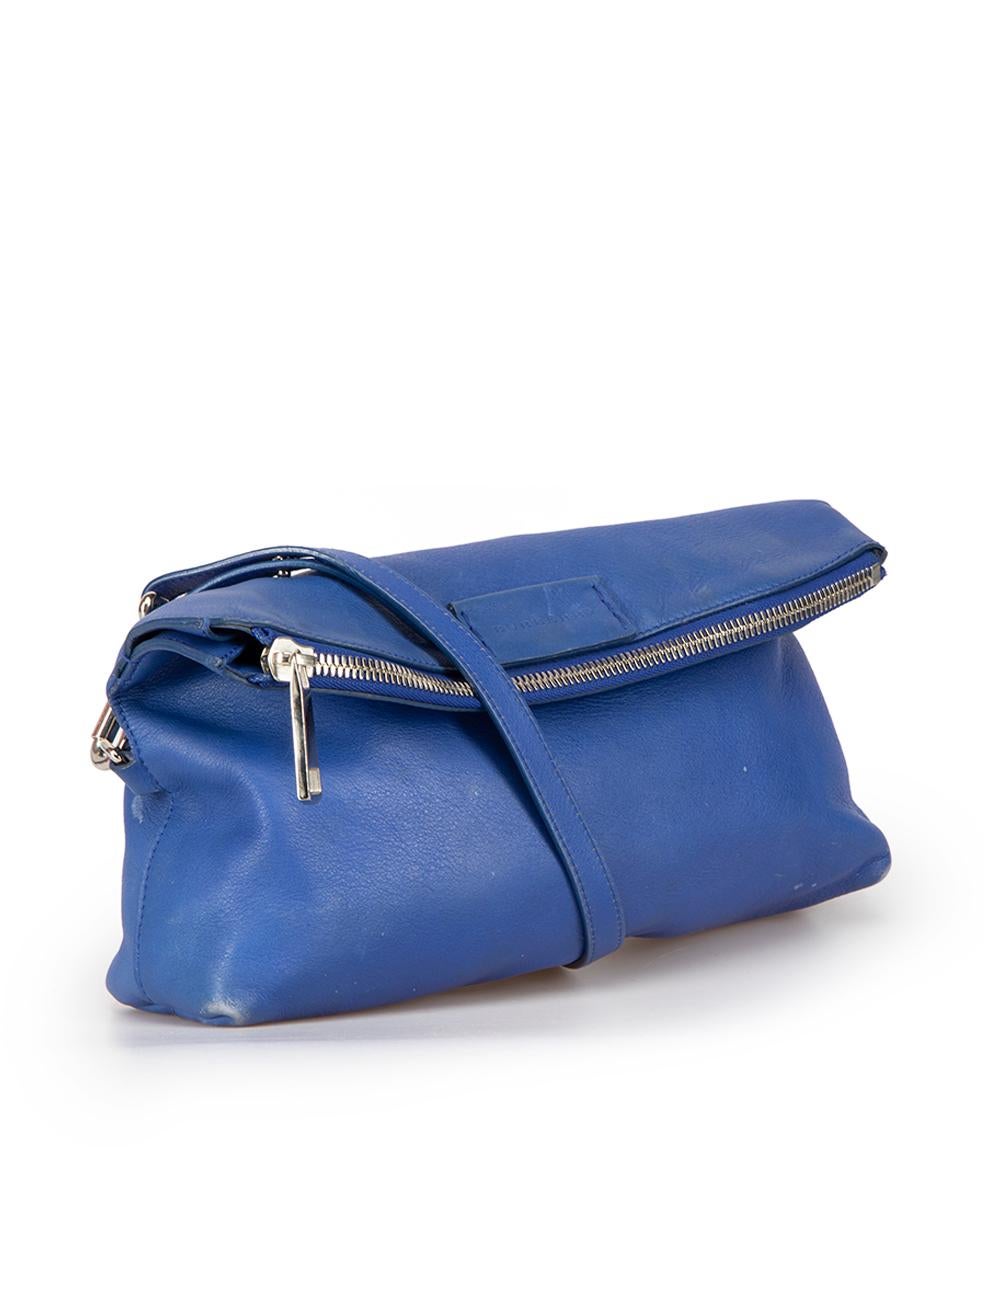 CONDITION is Good. General wear to bag is evident. Moderate signs of wear to overall leather where abrasion and scratches is evident on this used Burberry designer resale item.
  
Details
Blue
Leather
Medium crossbody bag
Detachable and adjustable